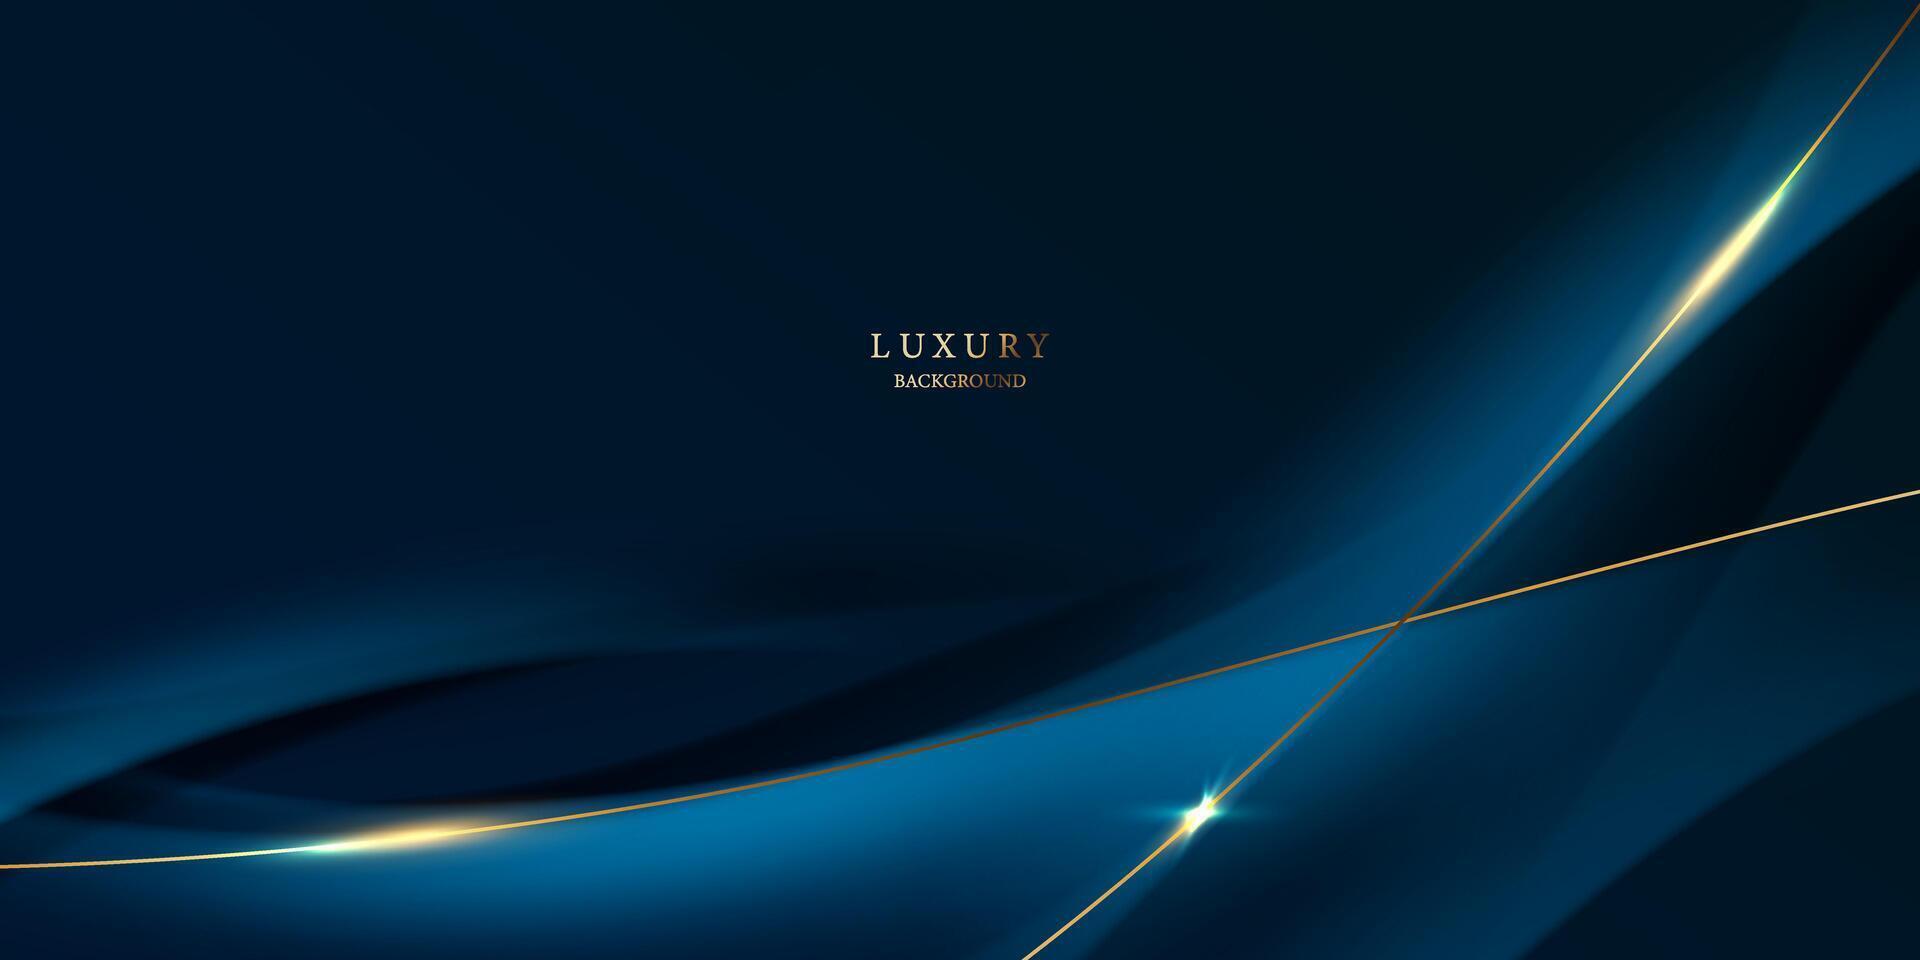 blue abstract background with luxury golden elements vector illustration